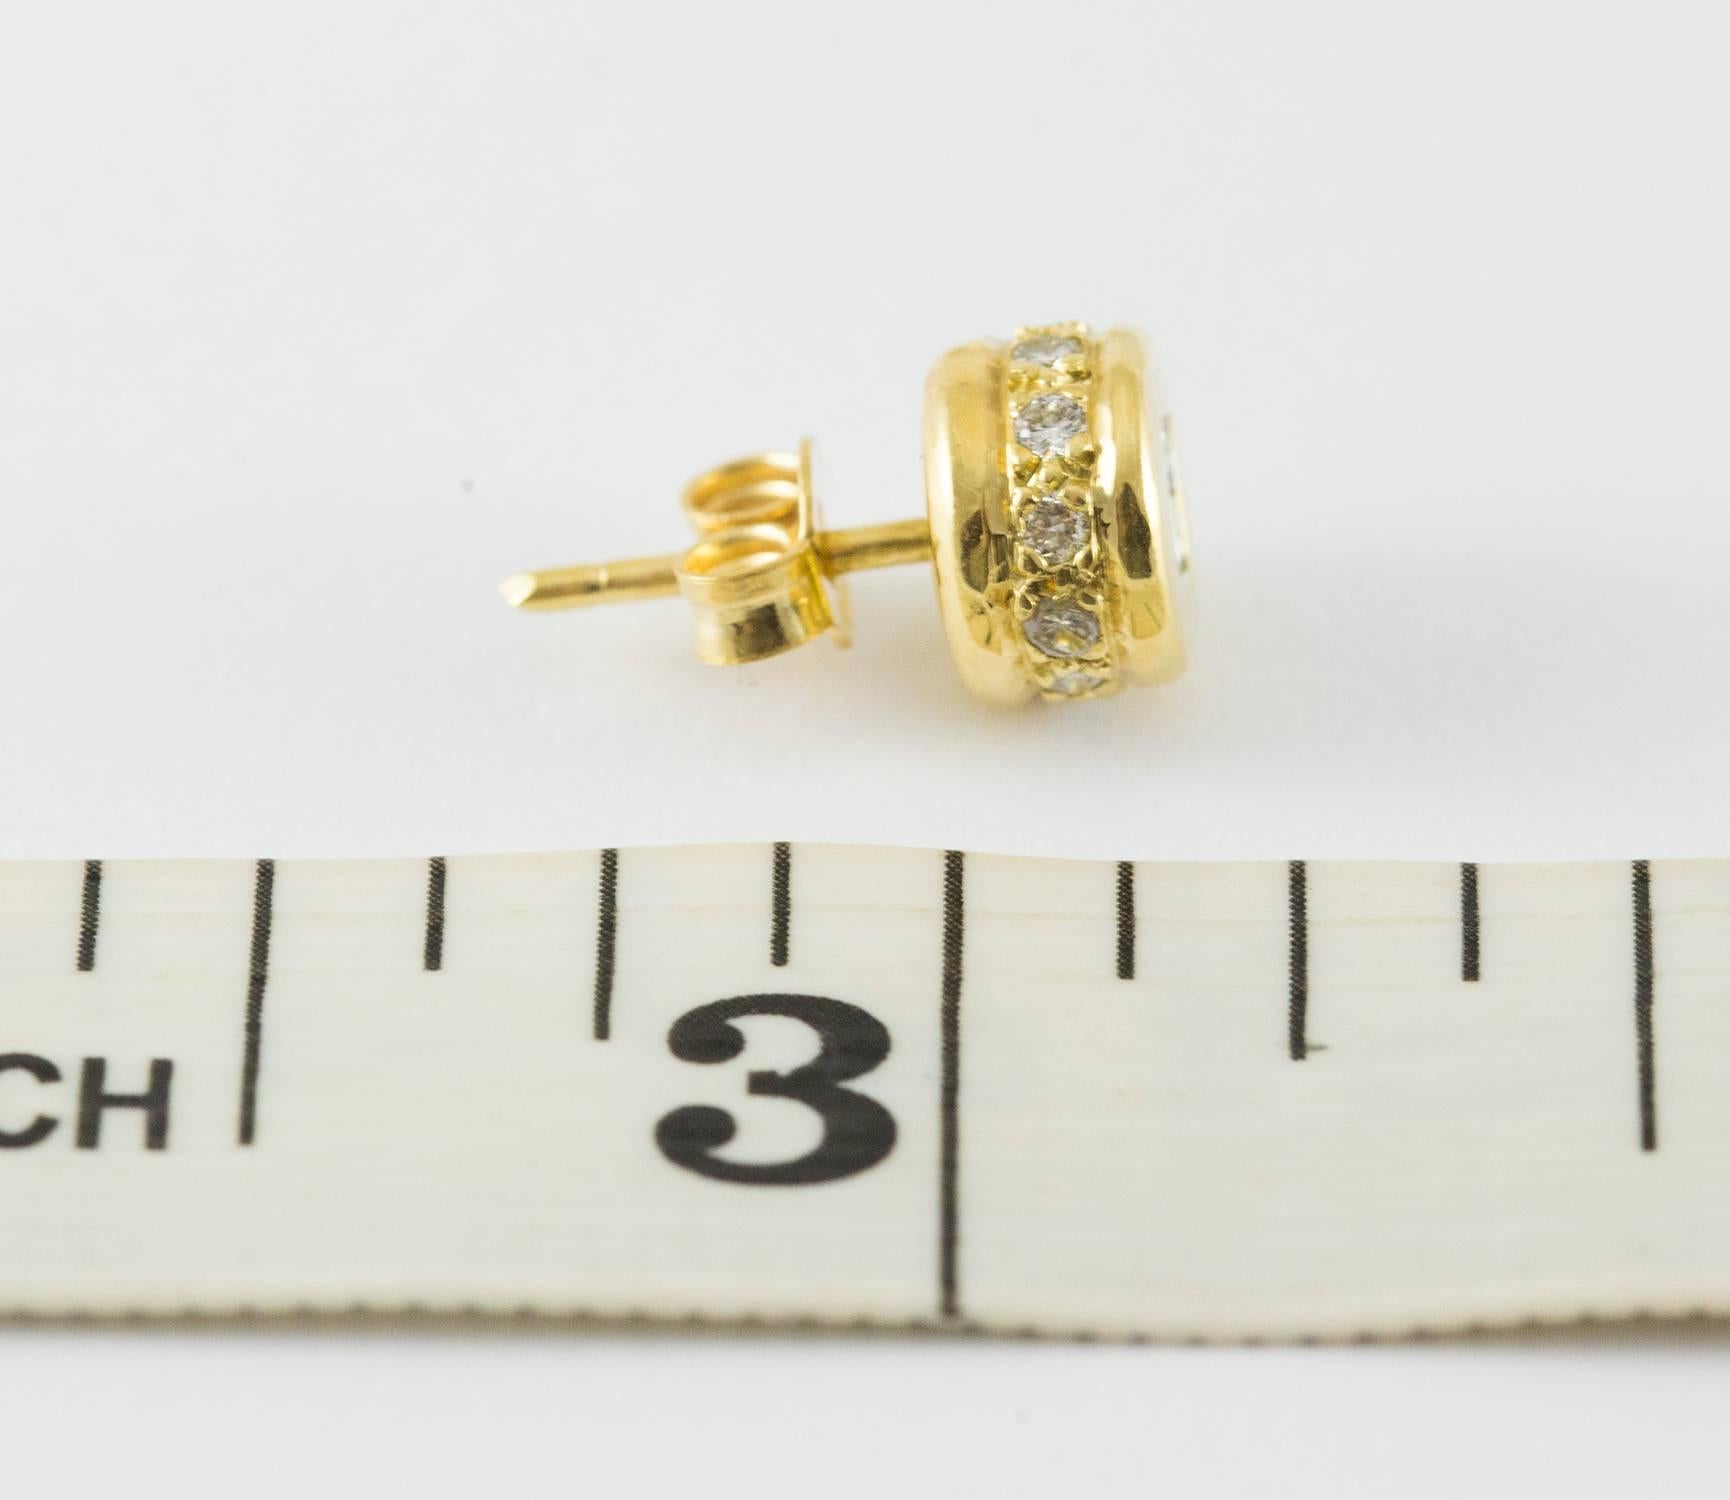 Vintage Yellow Gold and Diamond Stud Earrings In Excellent Condition For Sale In Toronto, Ontario